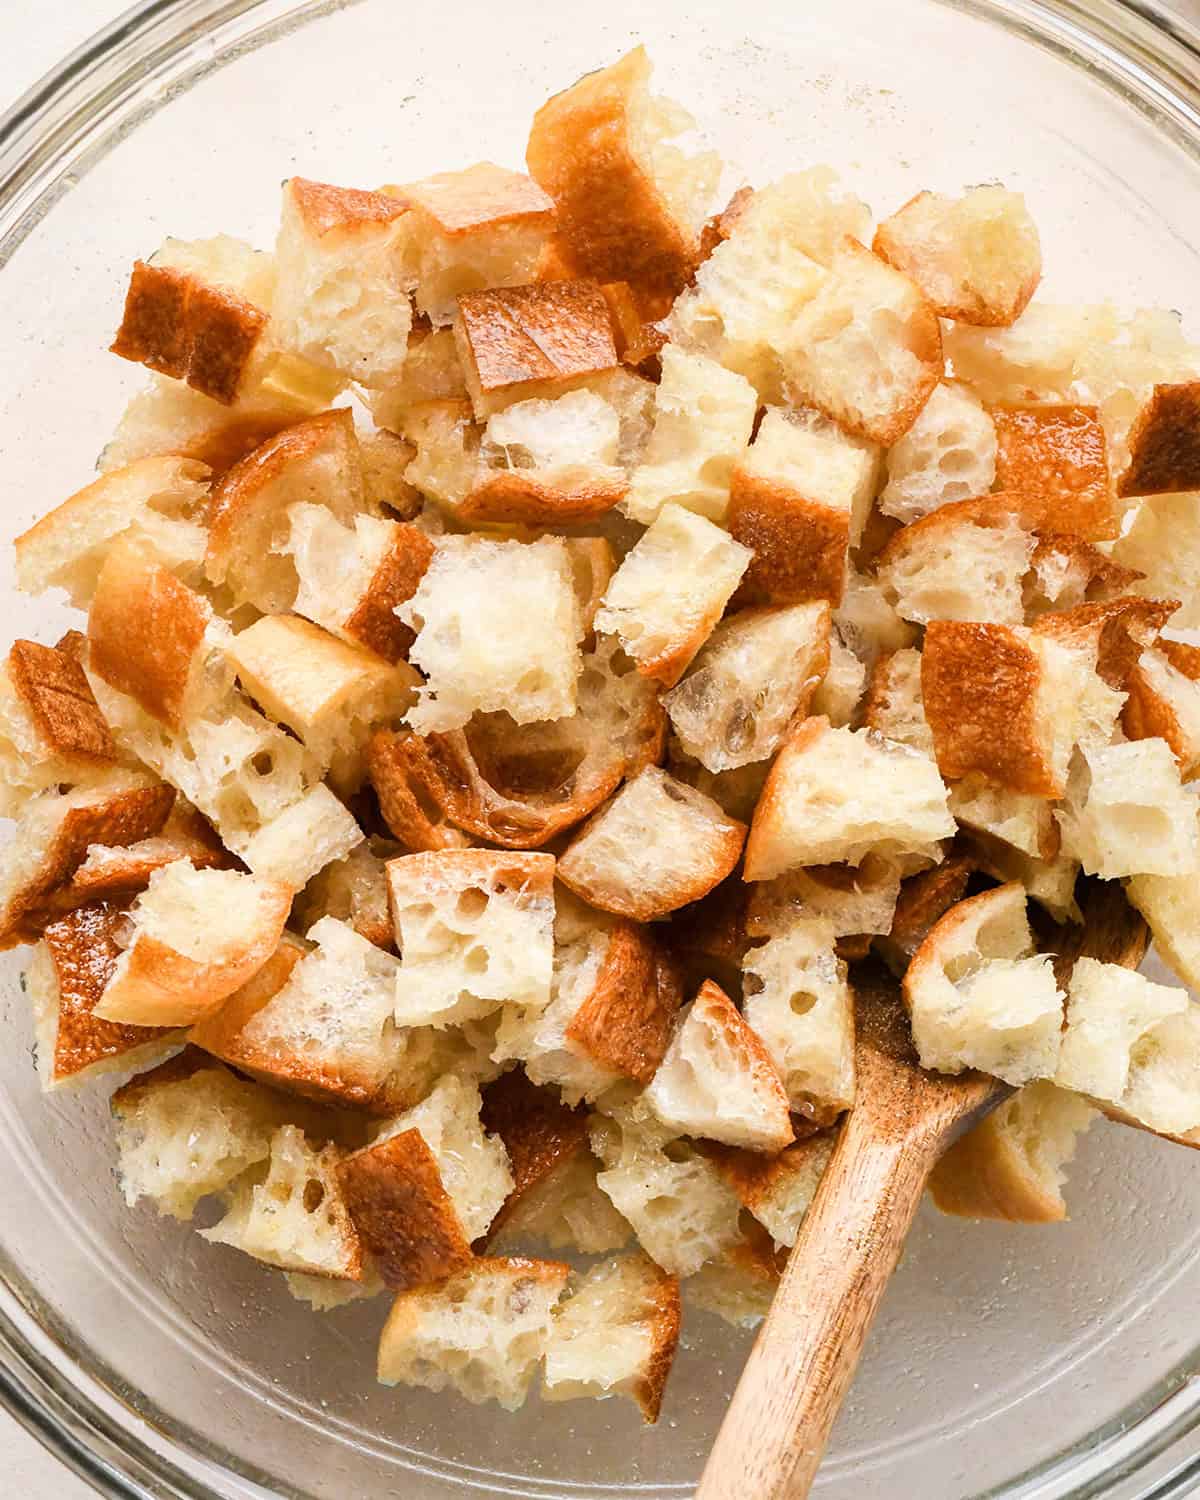 How to Make Croutons - stirring the croutons with a wooden spoon in a bowl